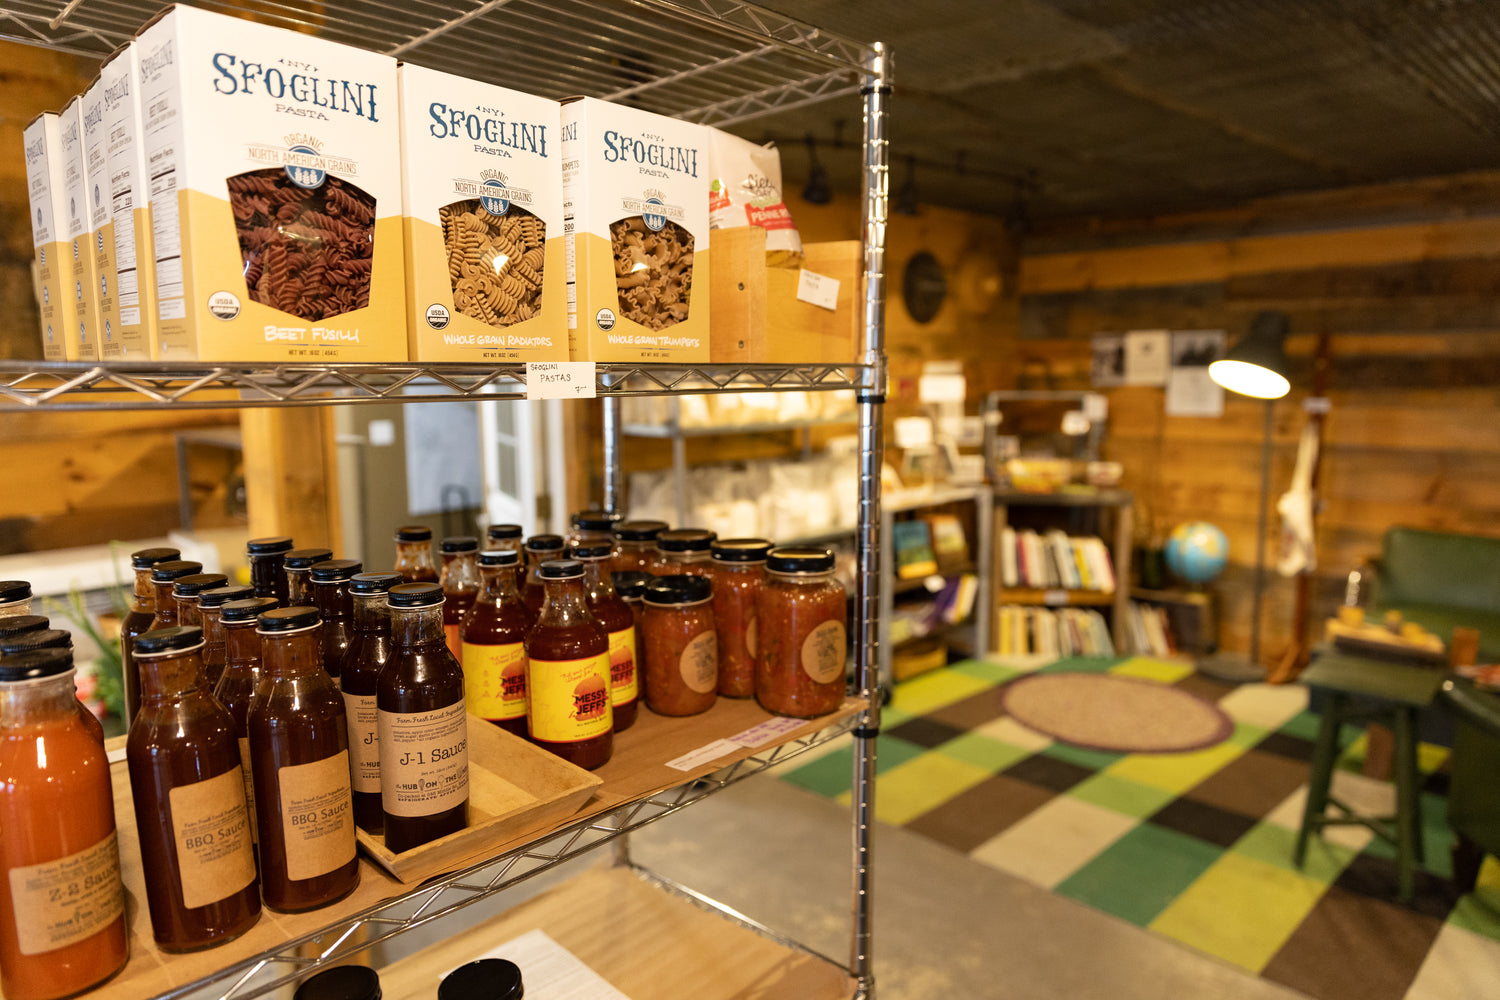 Stop by for great local products!